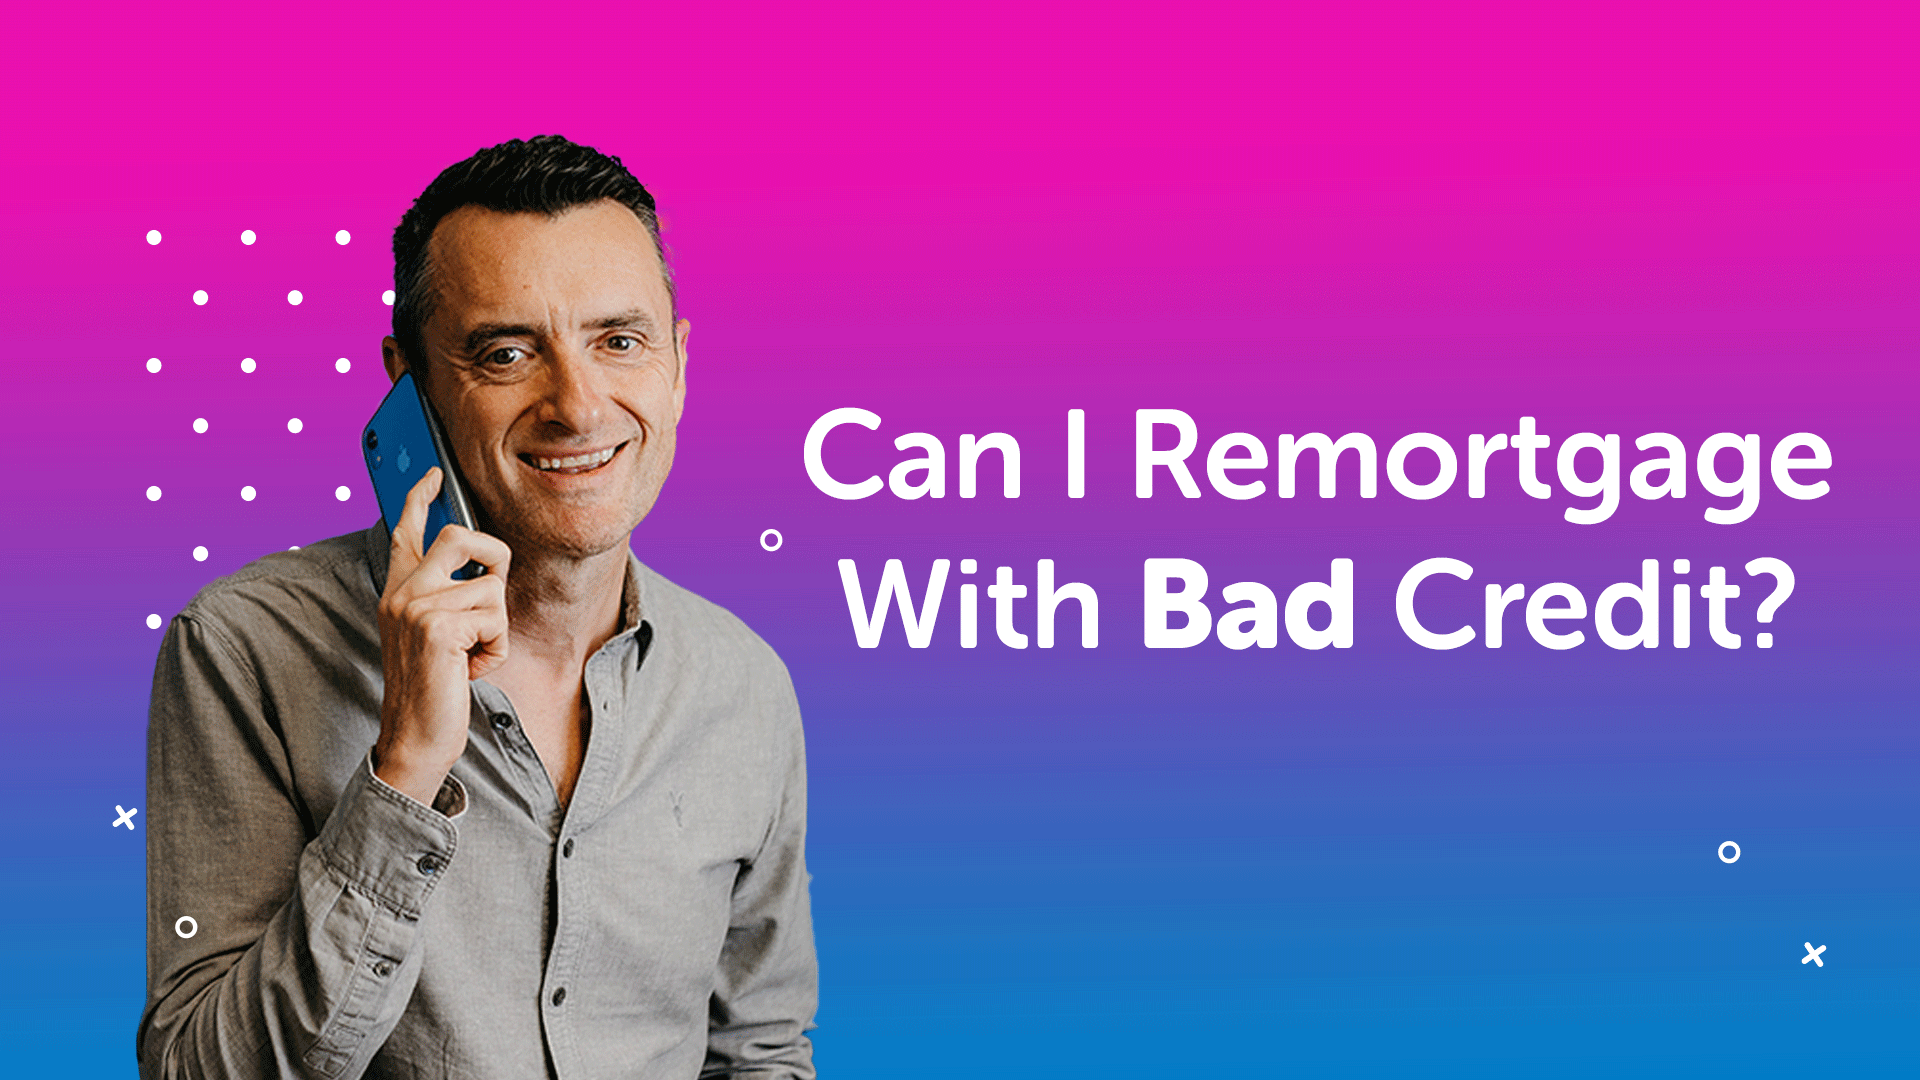 Remortgage With Bad Credit